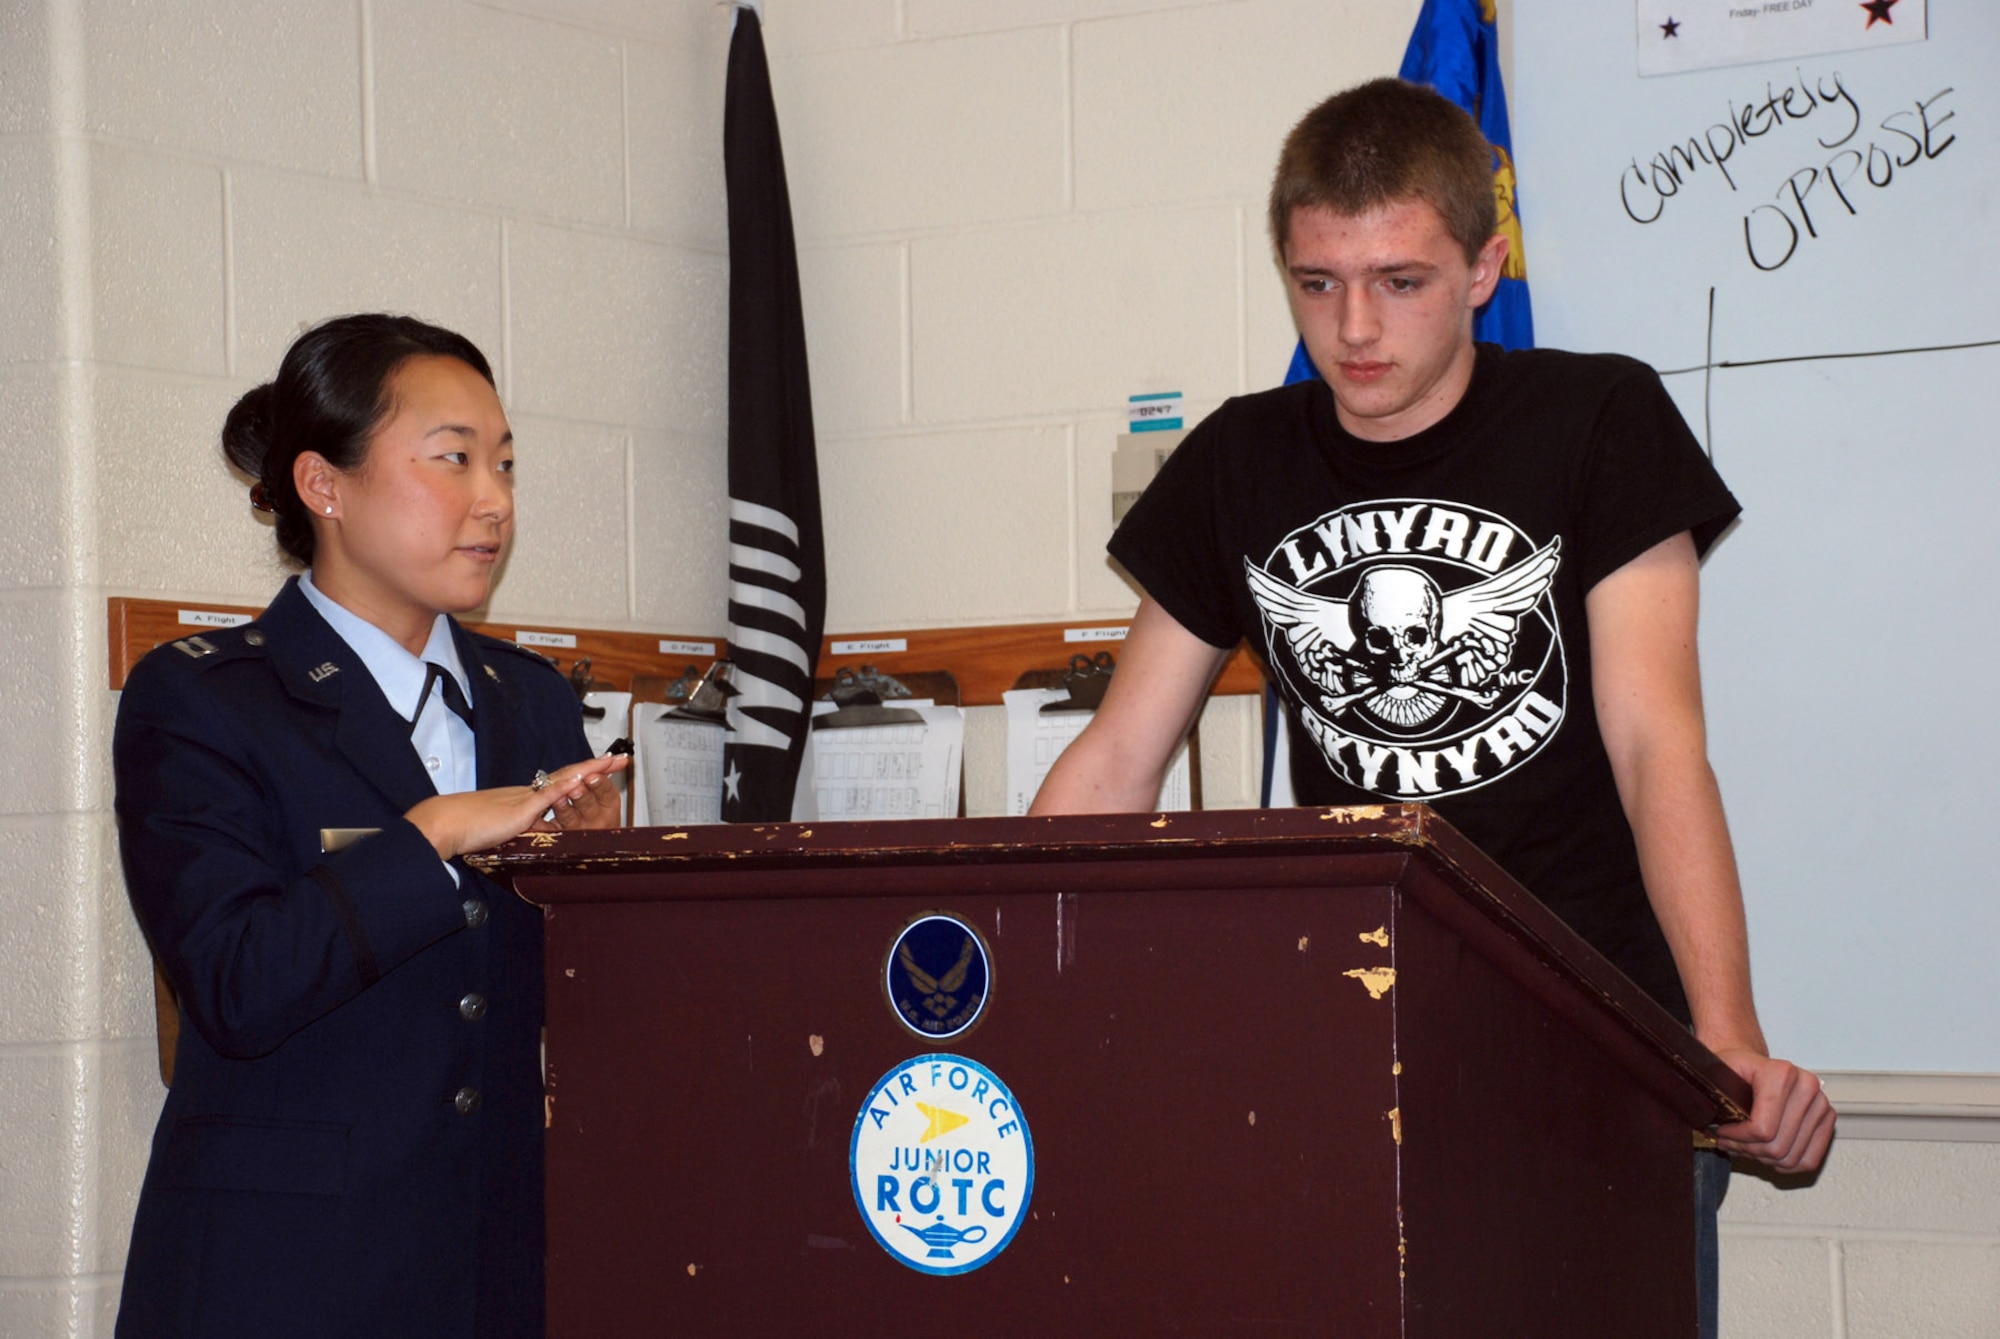 Taylor Lewis, a Junior Reserve Officer Training Cadet, shares his thoughts in front of his class during a debate for a class exercise being taught by Capt. Nora Cho, 22nd Air Refueling Wing Judge Advocate May 1 at Derby High School. On Law Day, Captain Cho teaches the students about the rights and privileges that youths have as U.S. citizens. (U.S. Air Force photo by Airman 1st Class Jessica Lockoski, 22nd ARW Public Affairs)